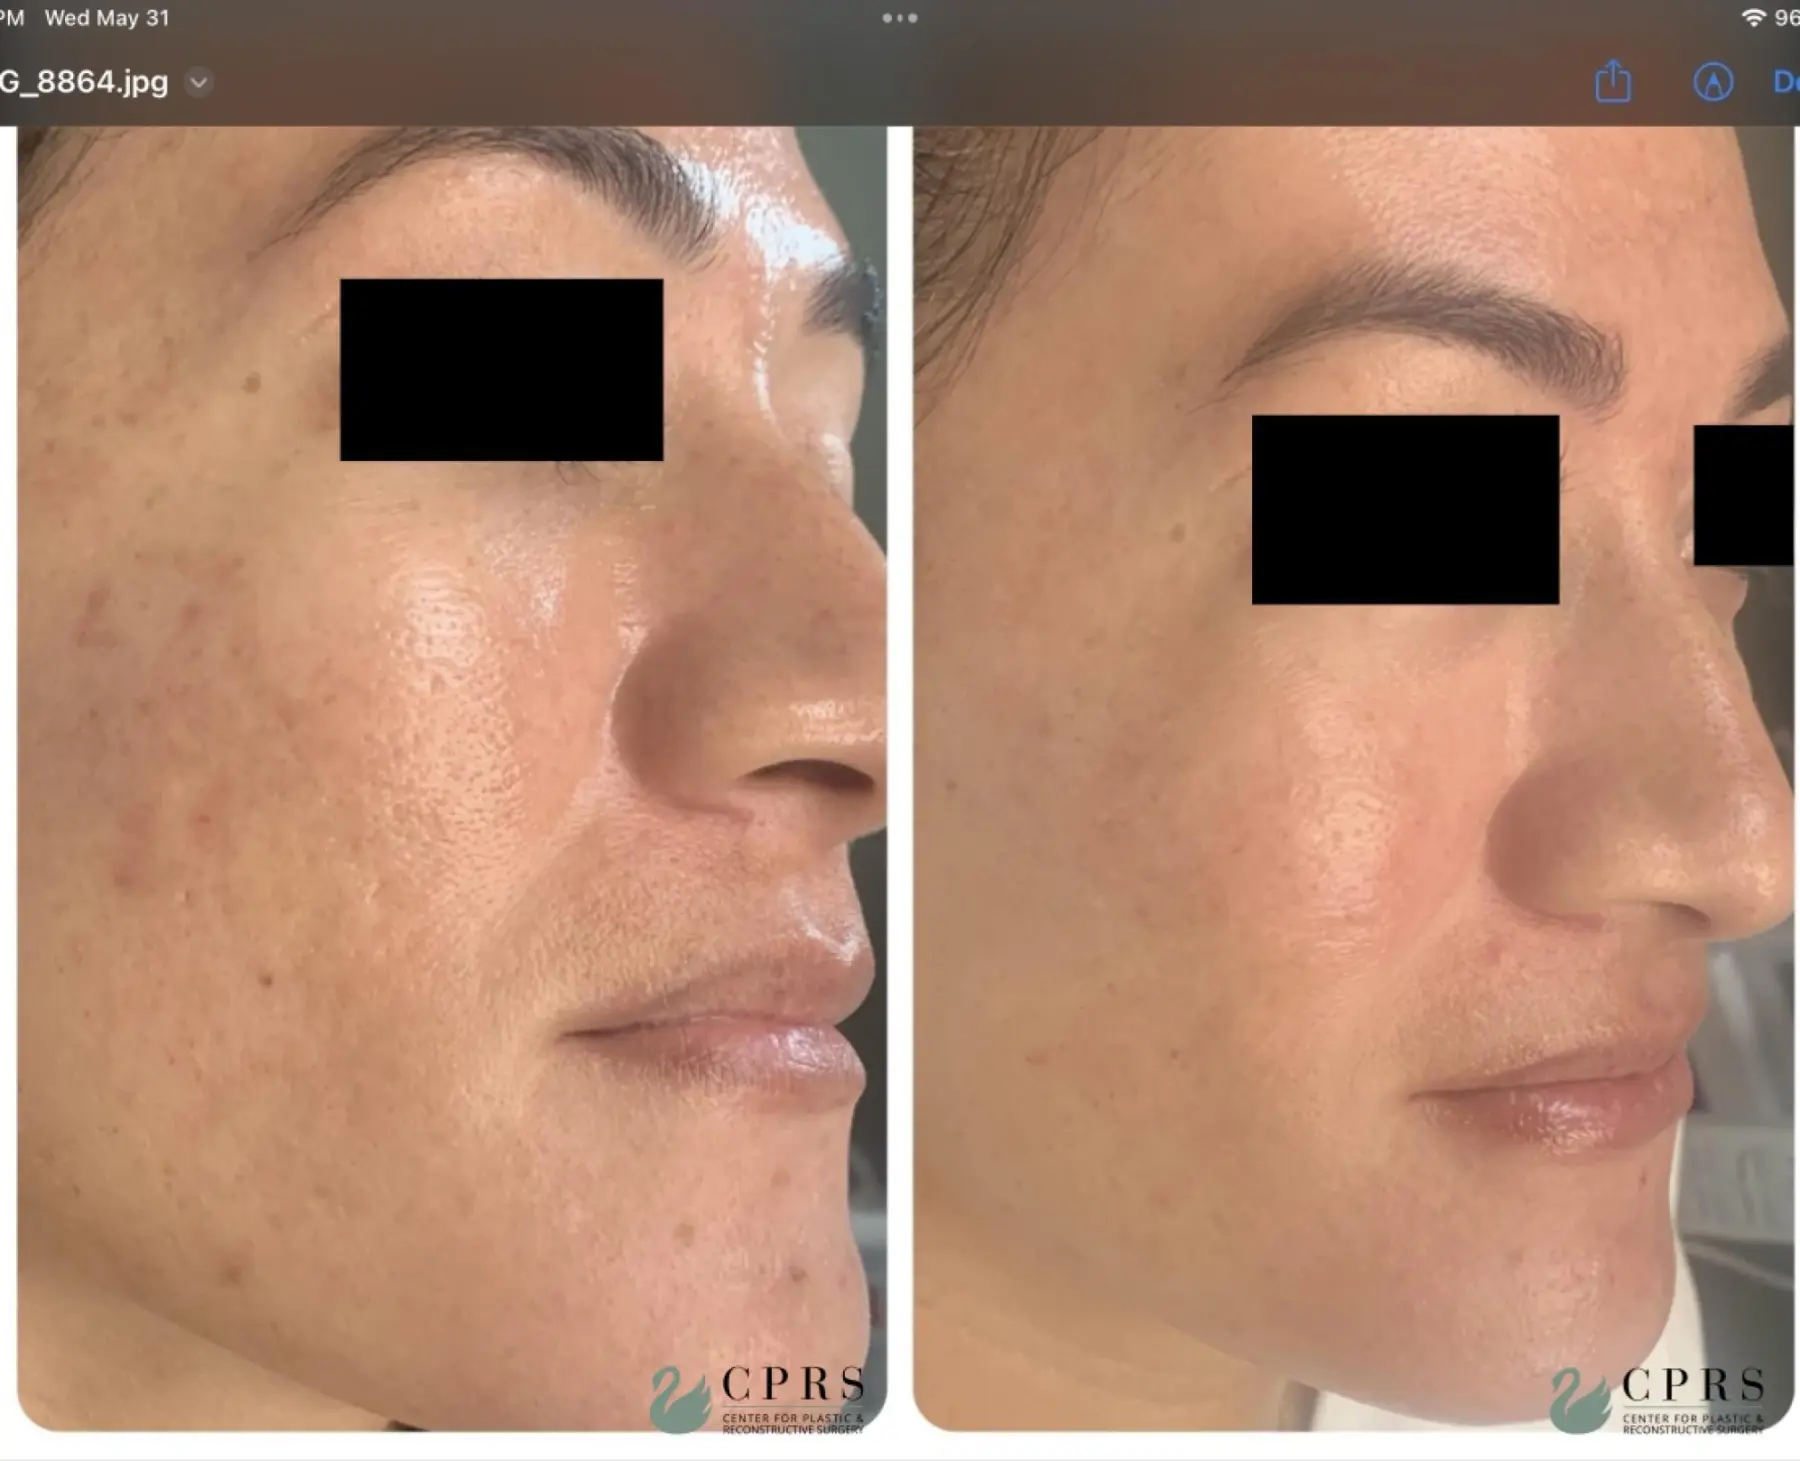 VI Peel : Patient 2 - Before and After 1